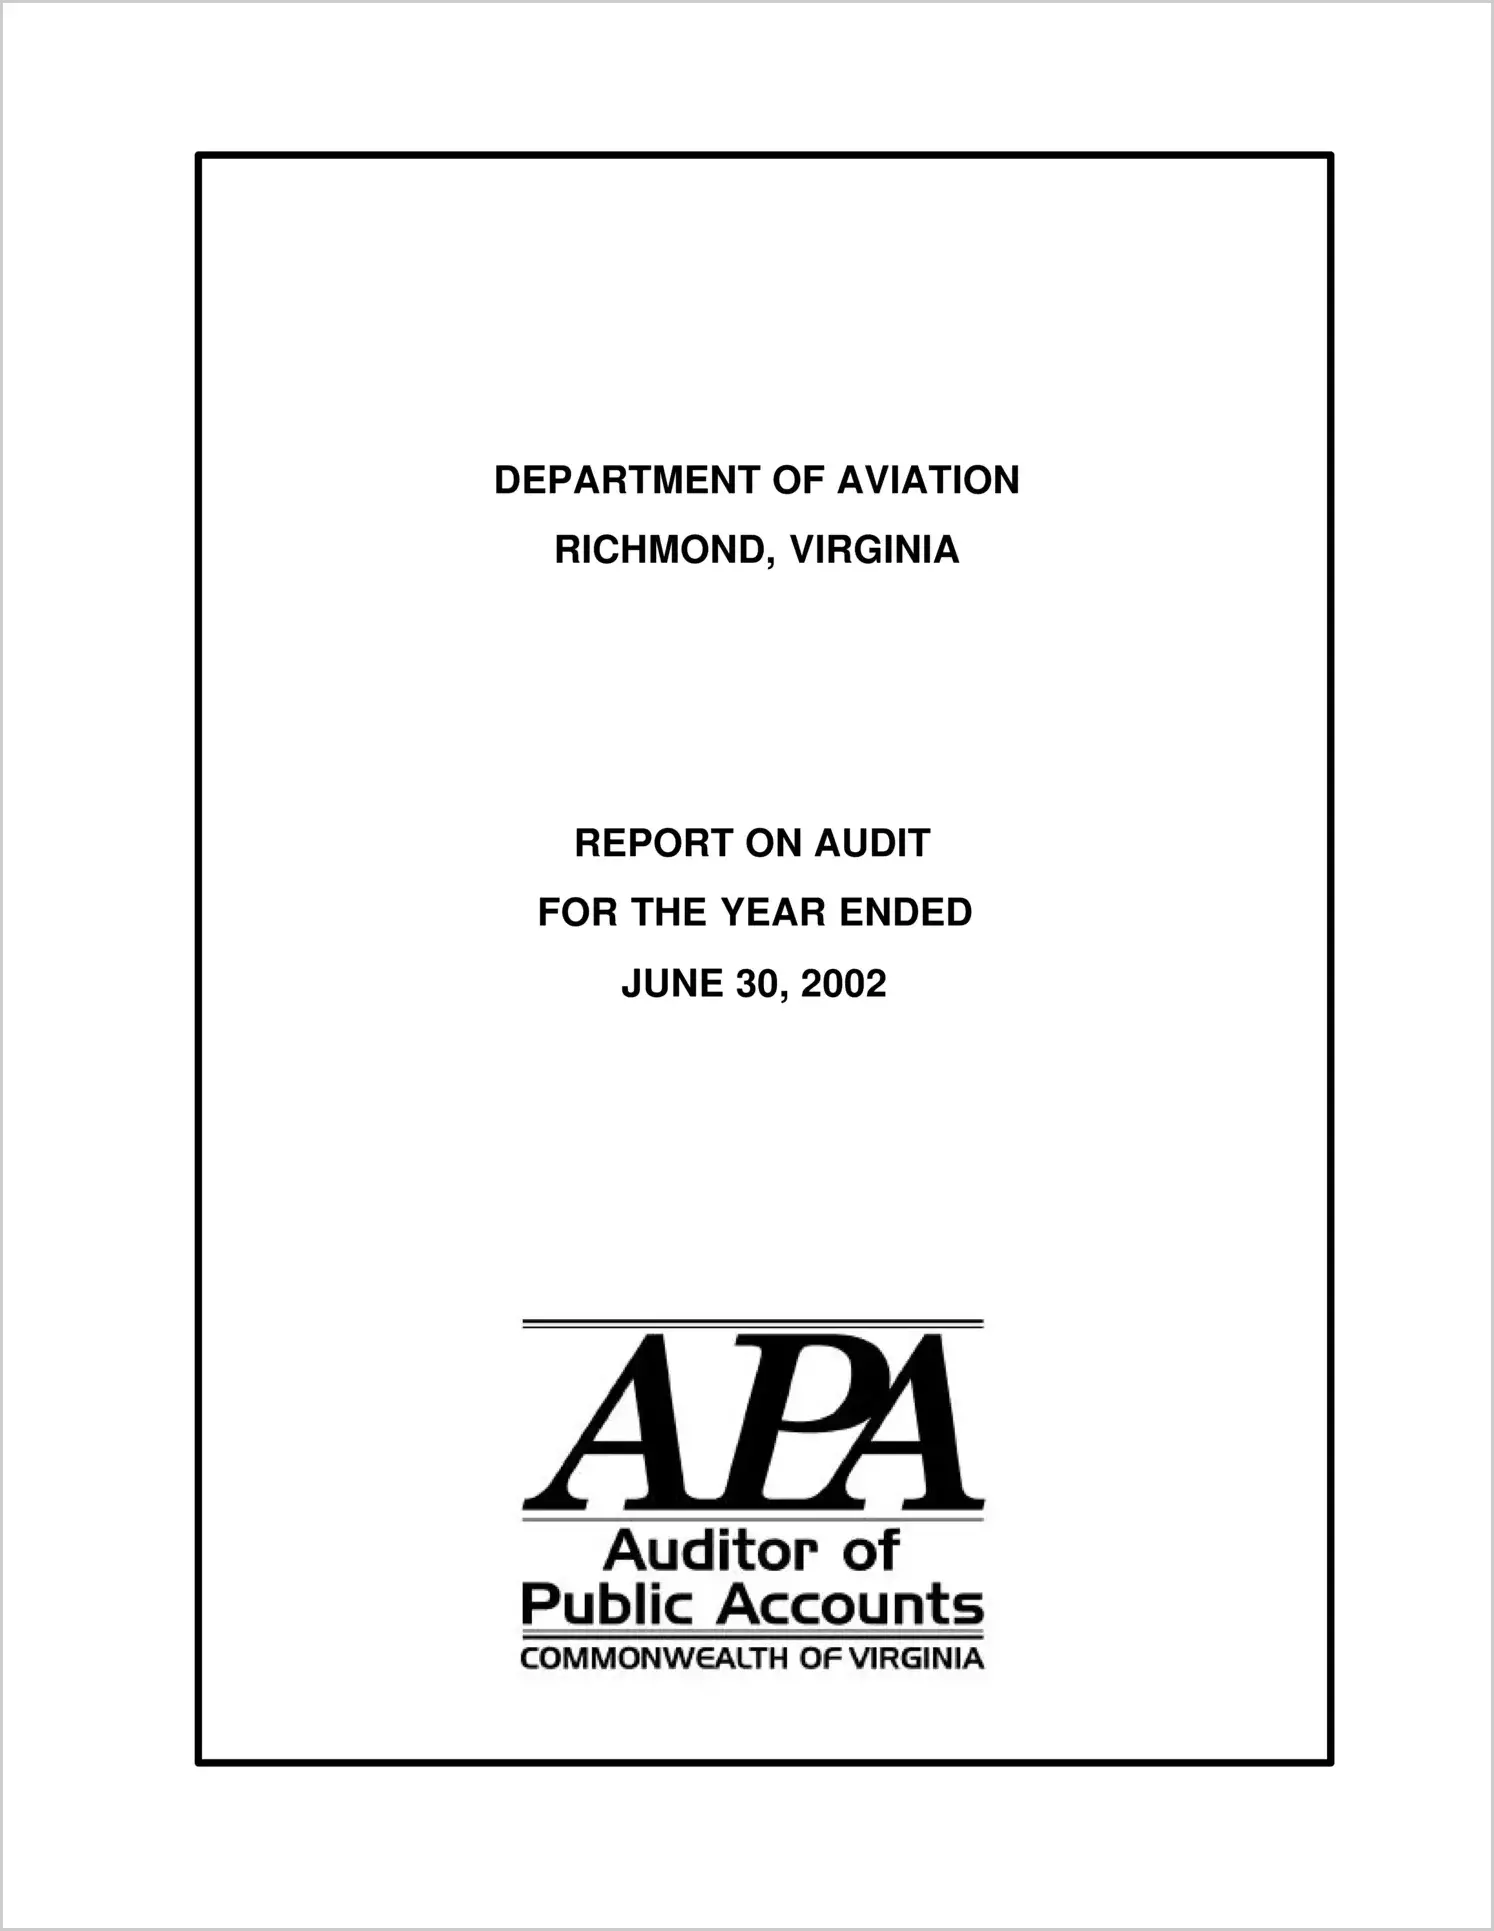 Department of Aviation for the year ended June 30, 2002